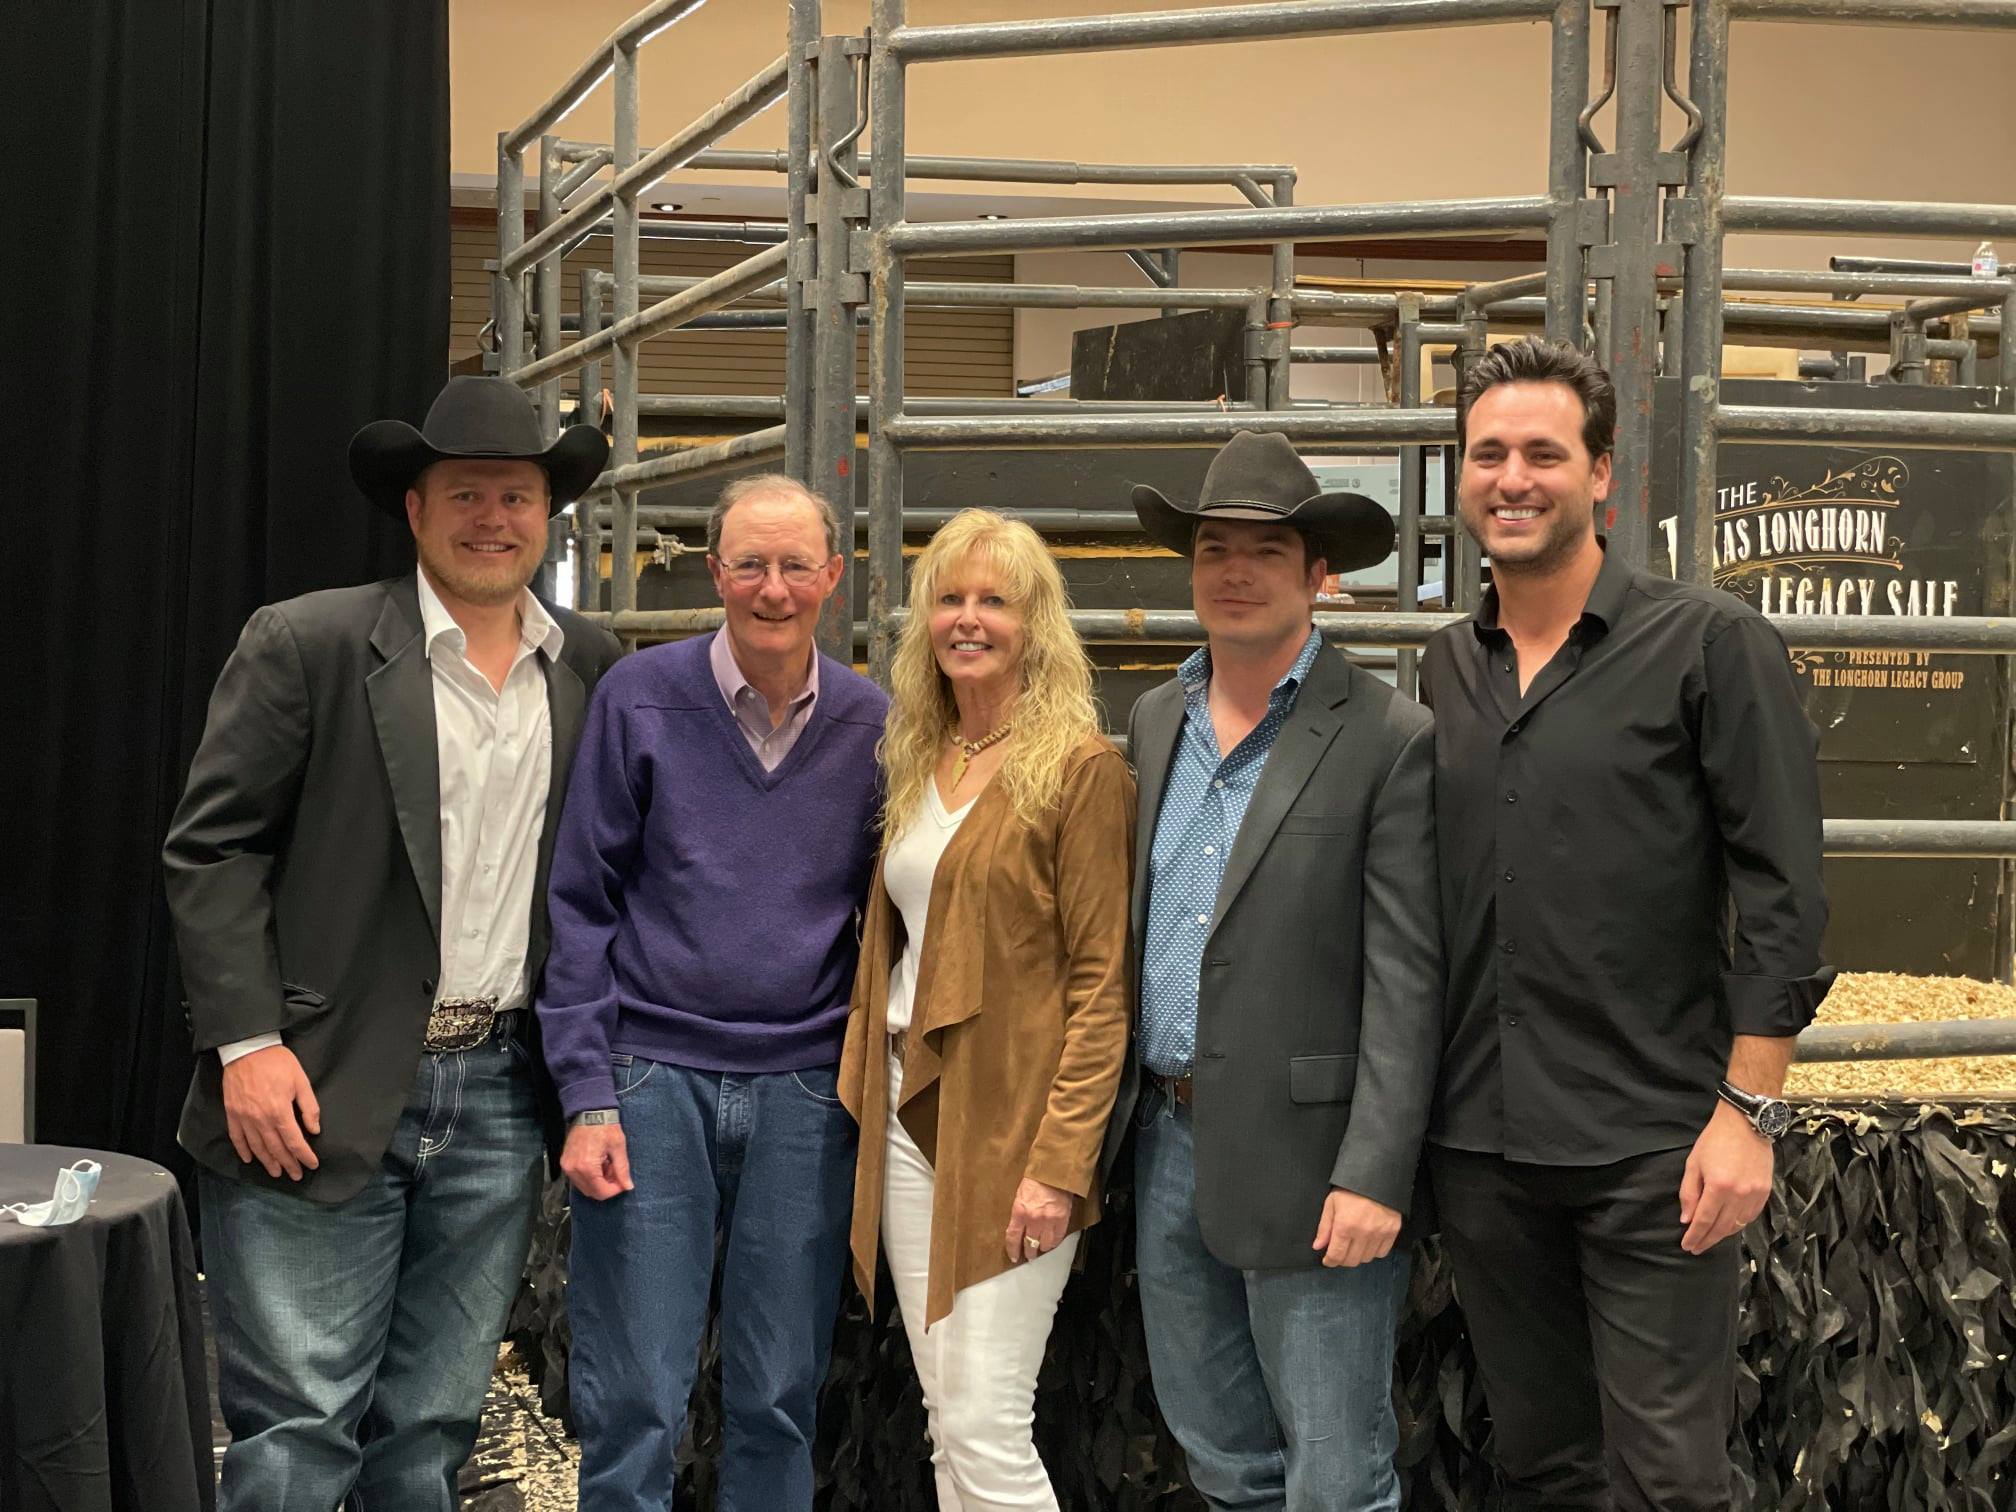 The Longhorn Legacy Group Sale Hosts and Hired Hand customers Chase Vasut, Mike Casey with Fairlea Longhorns, Ann Gravett with G&G Longhorns, Bear Davidson with G&G Longhorns and Lane Craft with Craft Ranch Longhorns